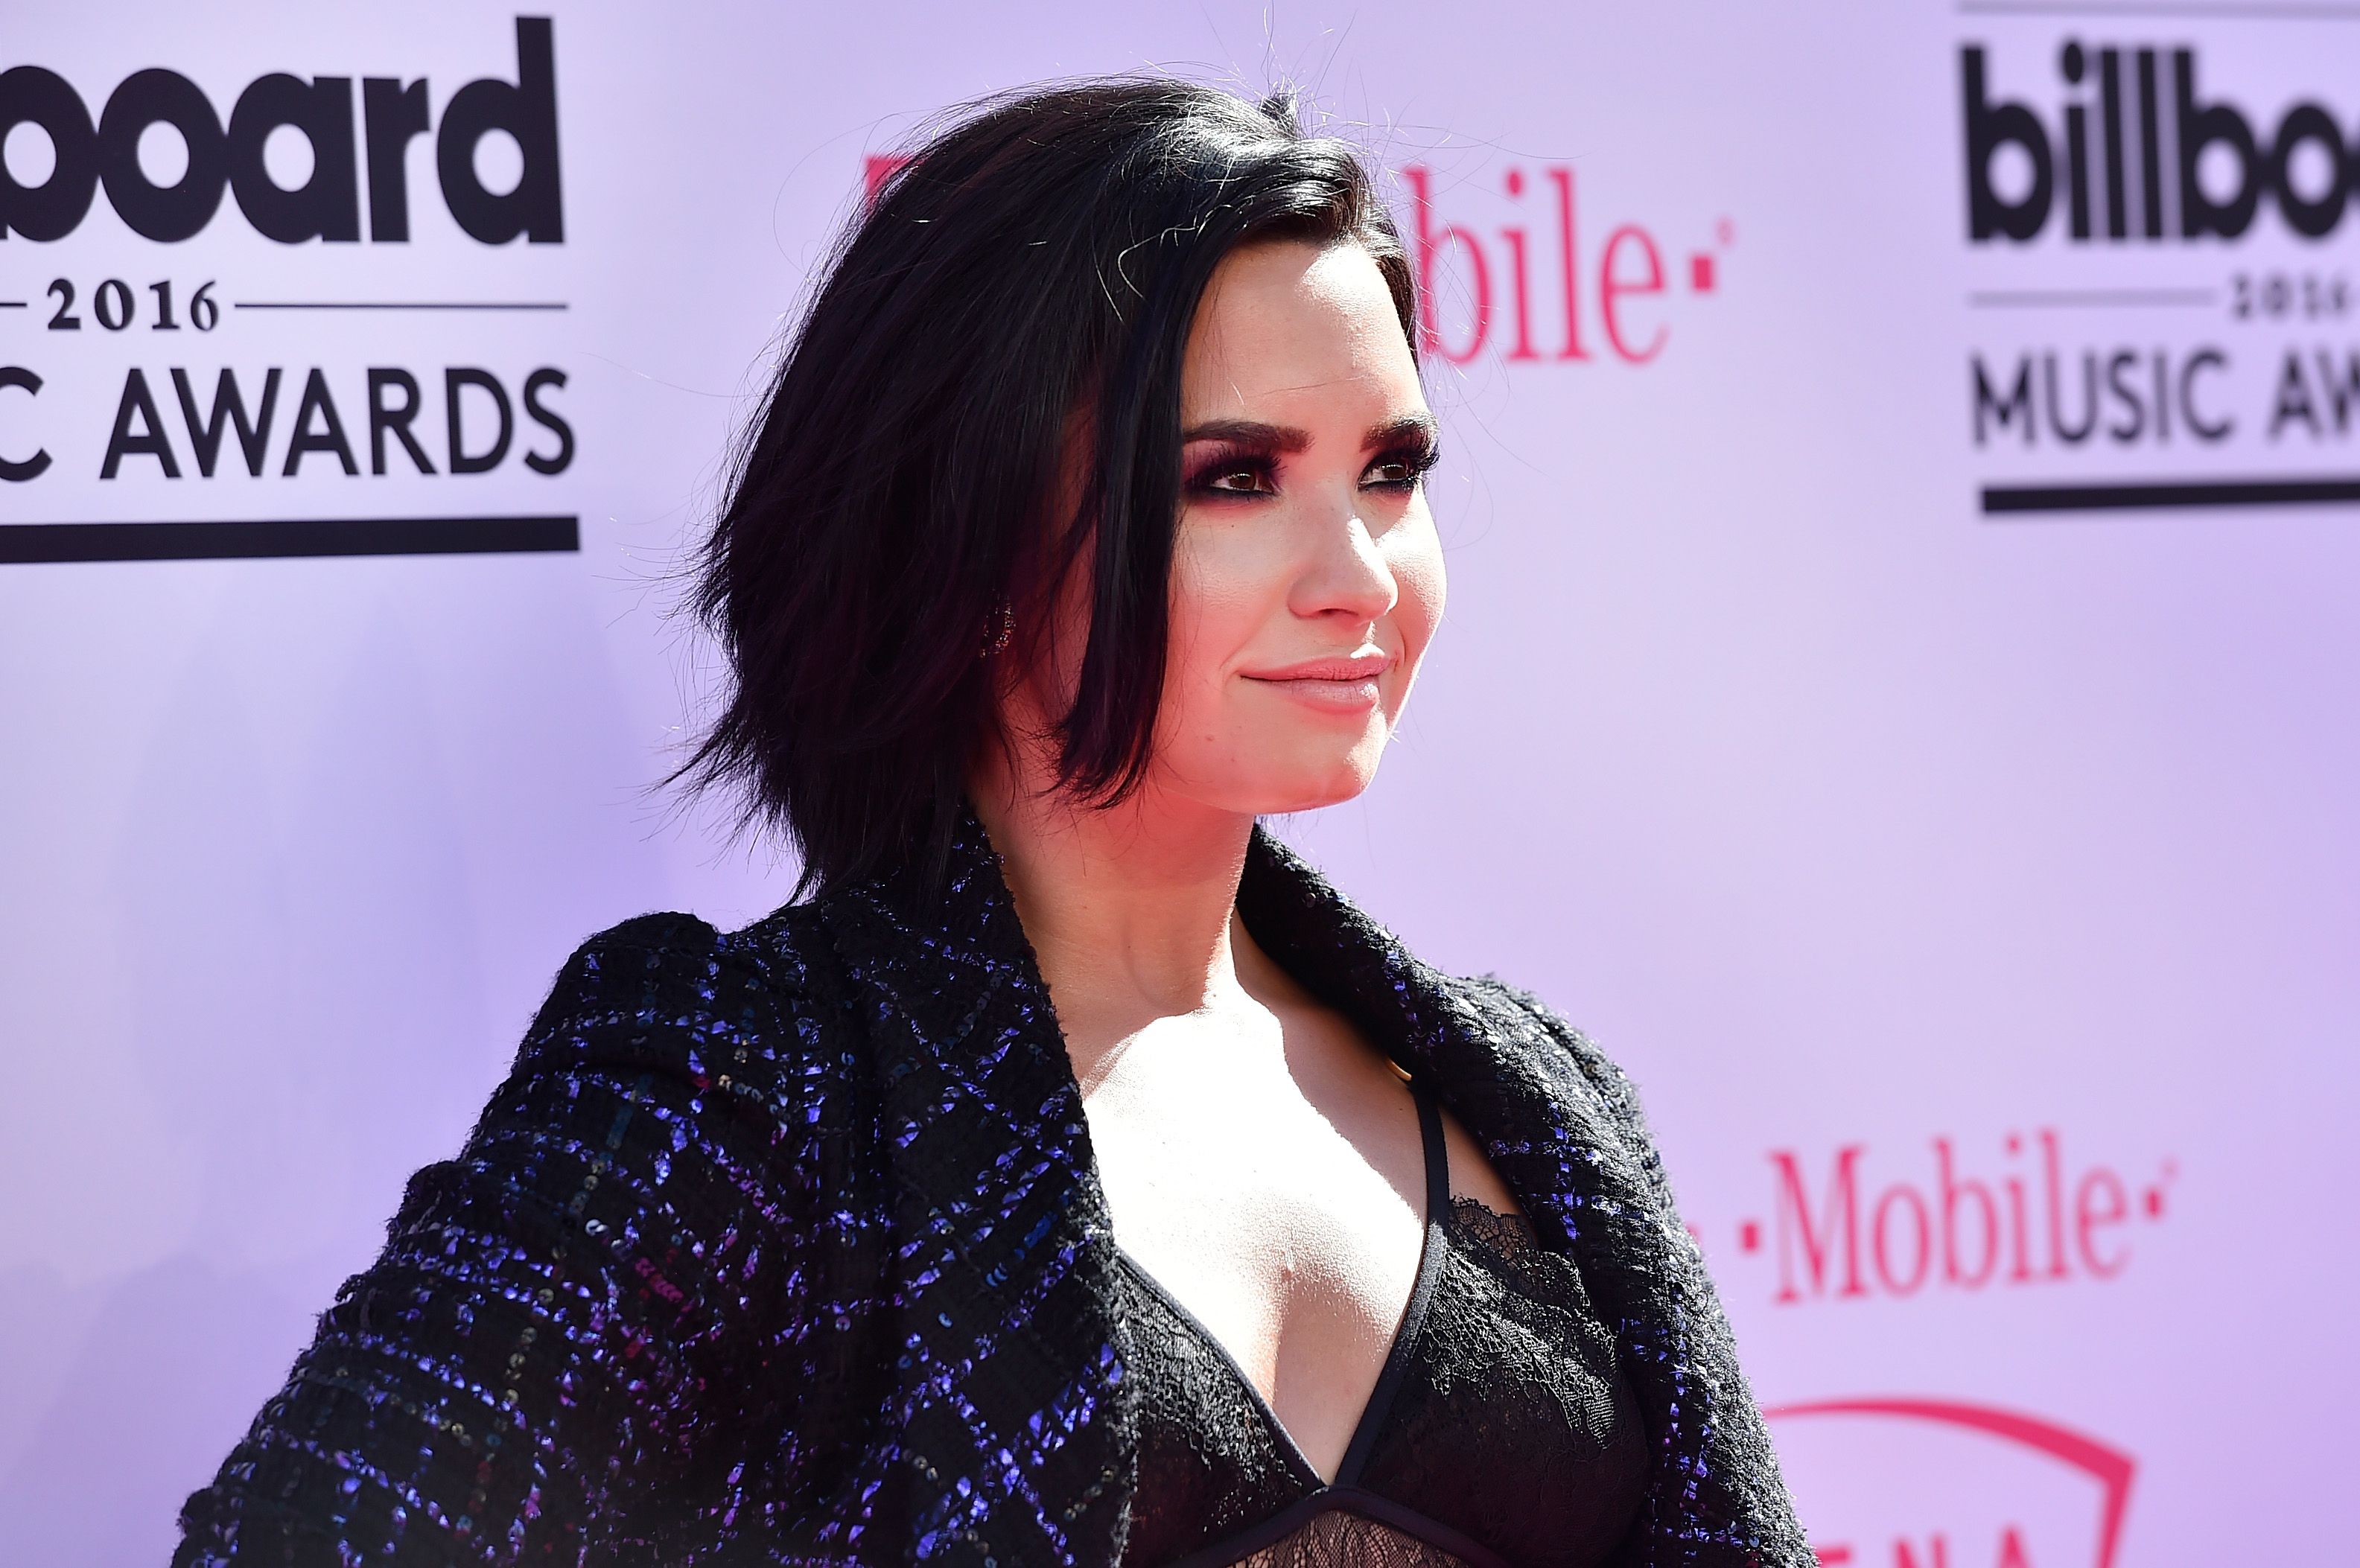 Demi Lovato at the 2016 Billboard Music Awards at T-Mobile Arena on May 22, 2016 | Photo: Getty Images